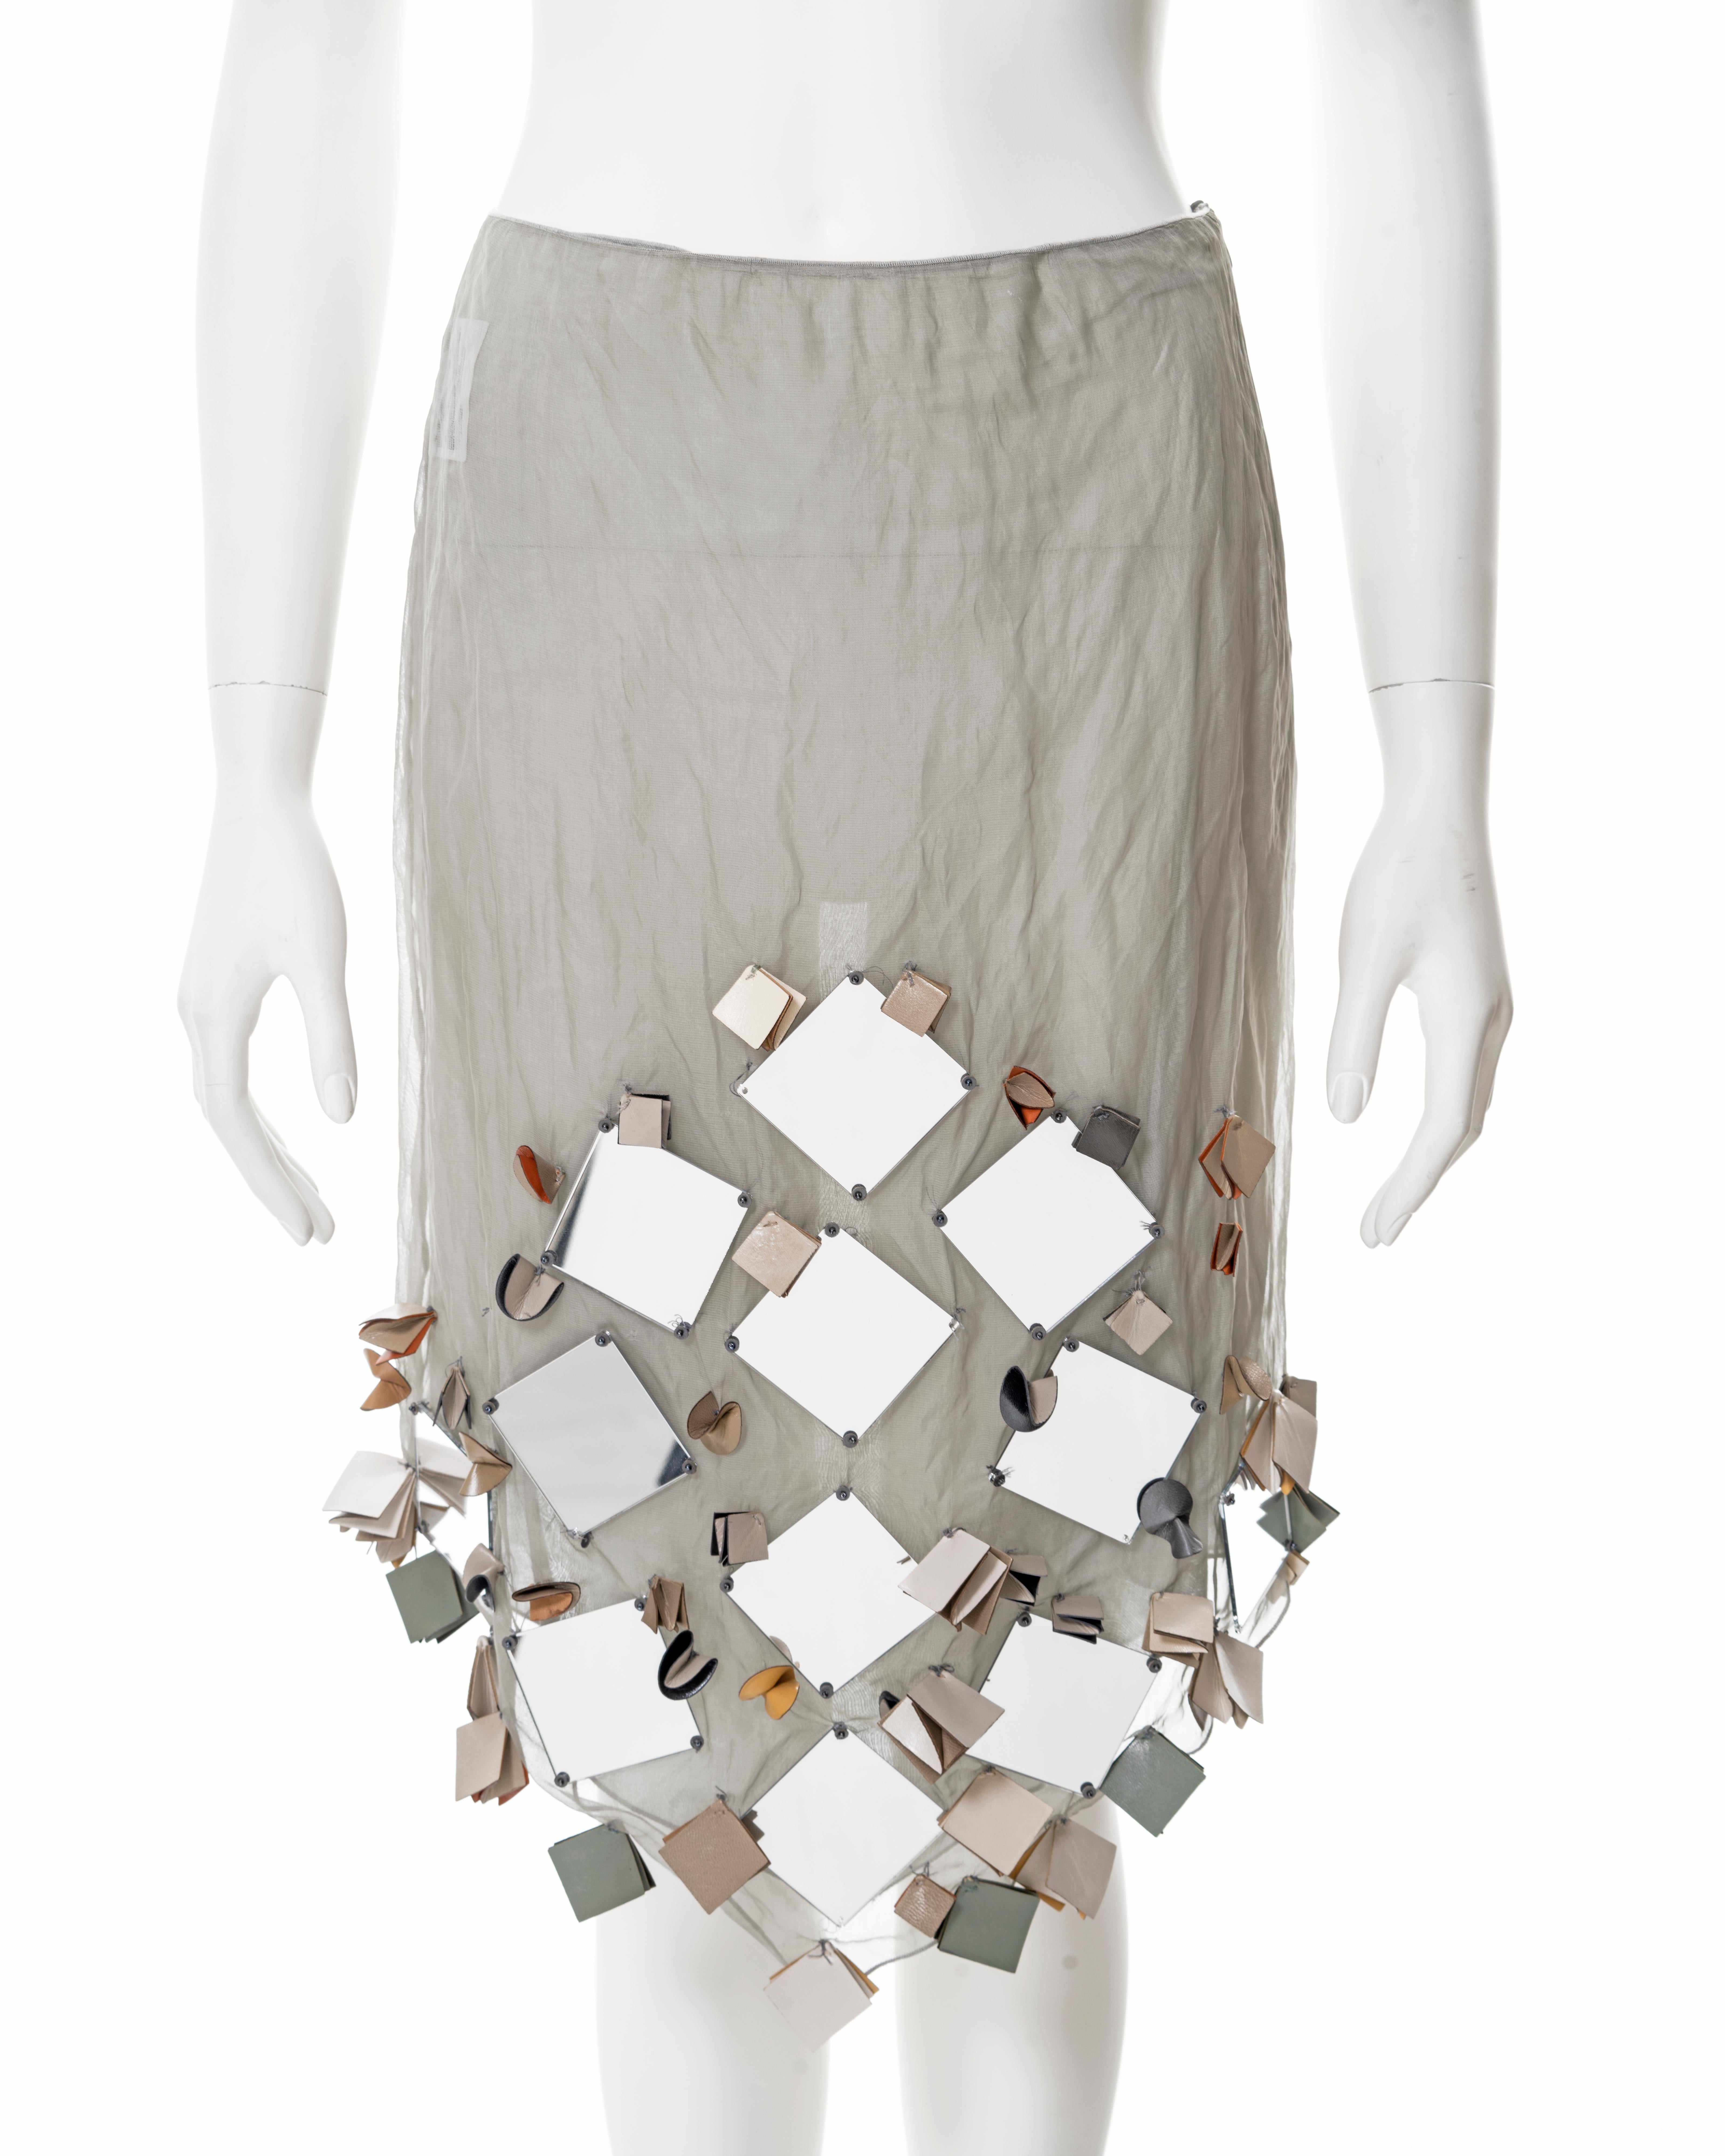 ▪ Prada embellished skirt 
▪ Creative Director: Miuccia Prada
▪ Sold by One of a Kind Archive
▪ Spring-Summer 1999
▪ Constructed from sage crinkled silk lamé
▪ Sold with an optional cotton underskirt 
▪ Large square mirror and leather adornments 
▪